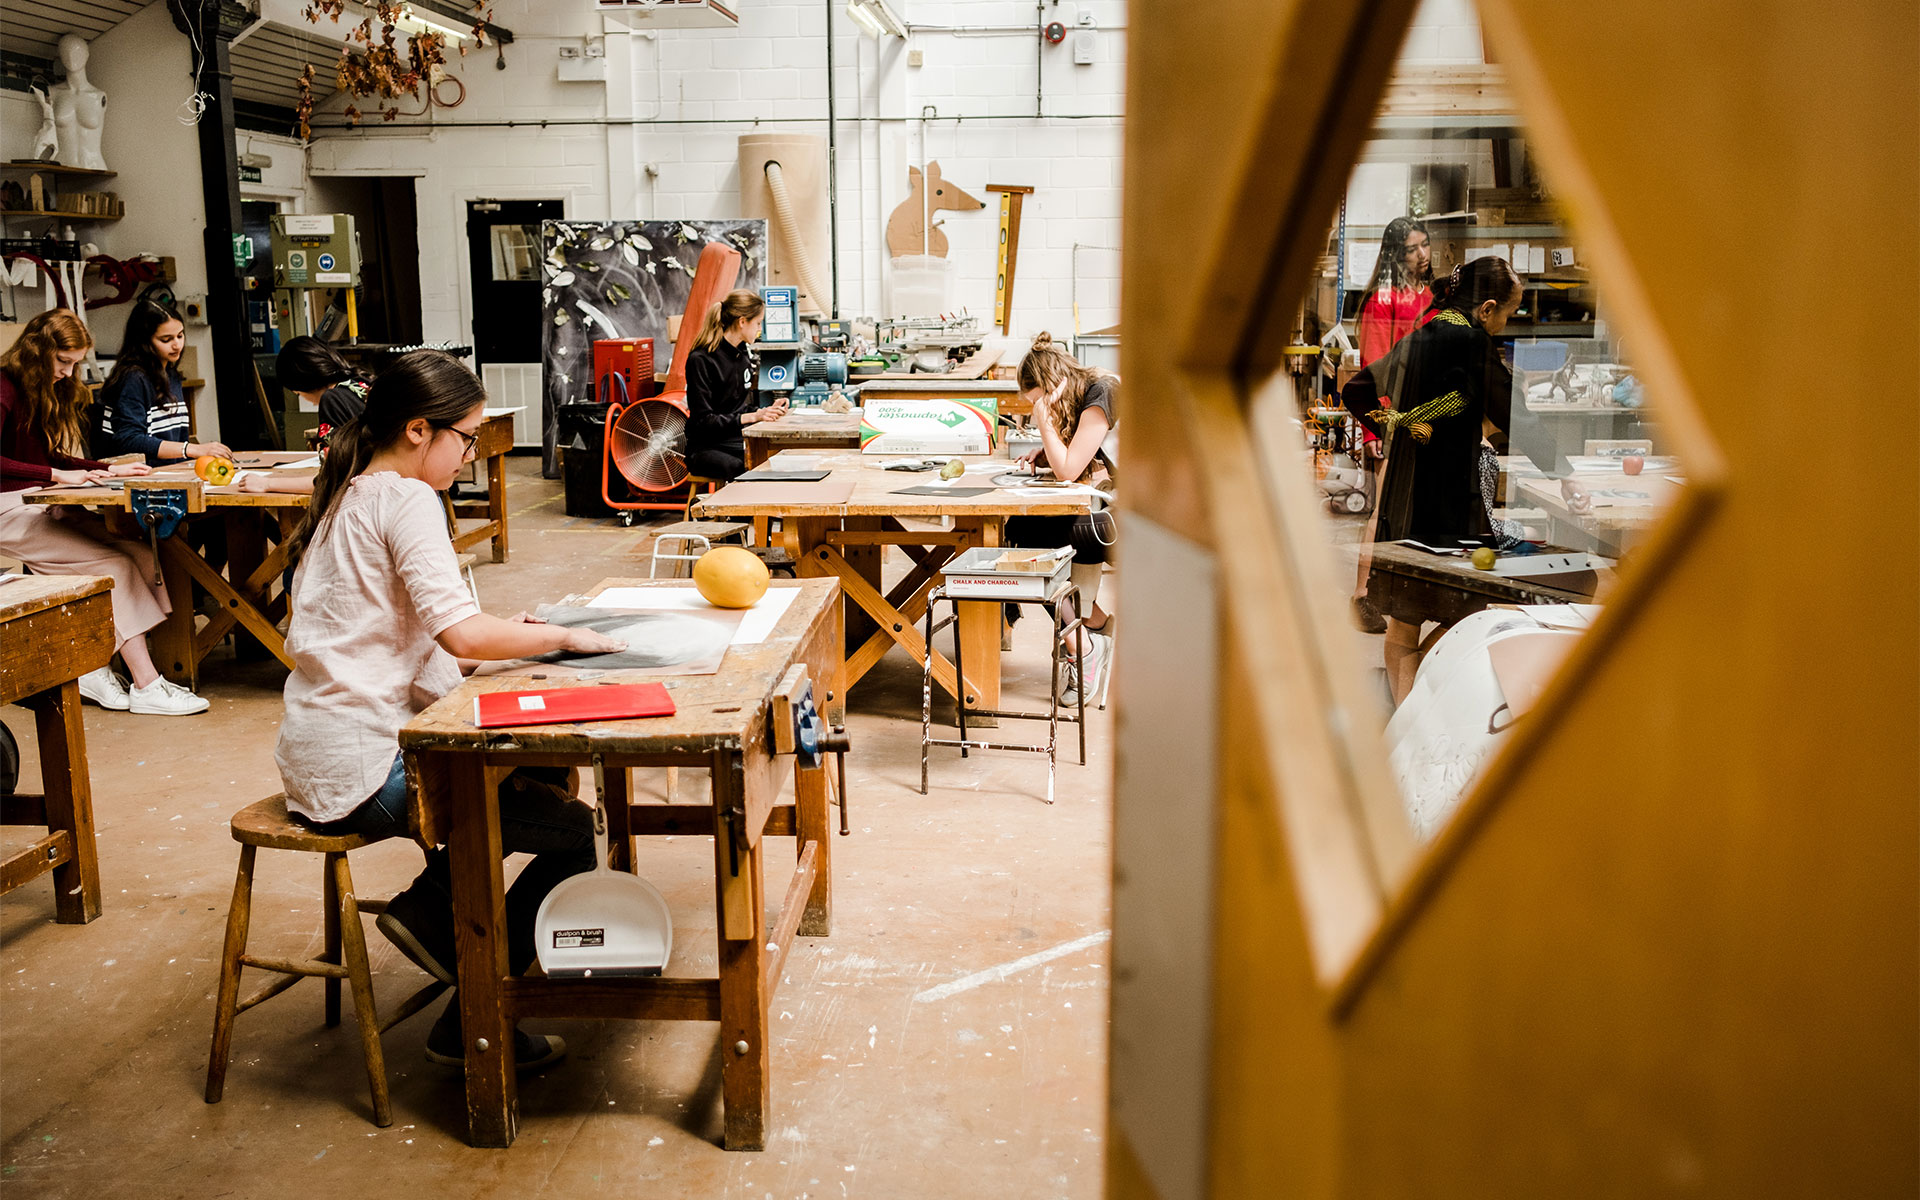 Students in the art and design studio.